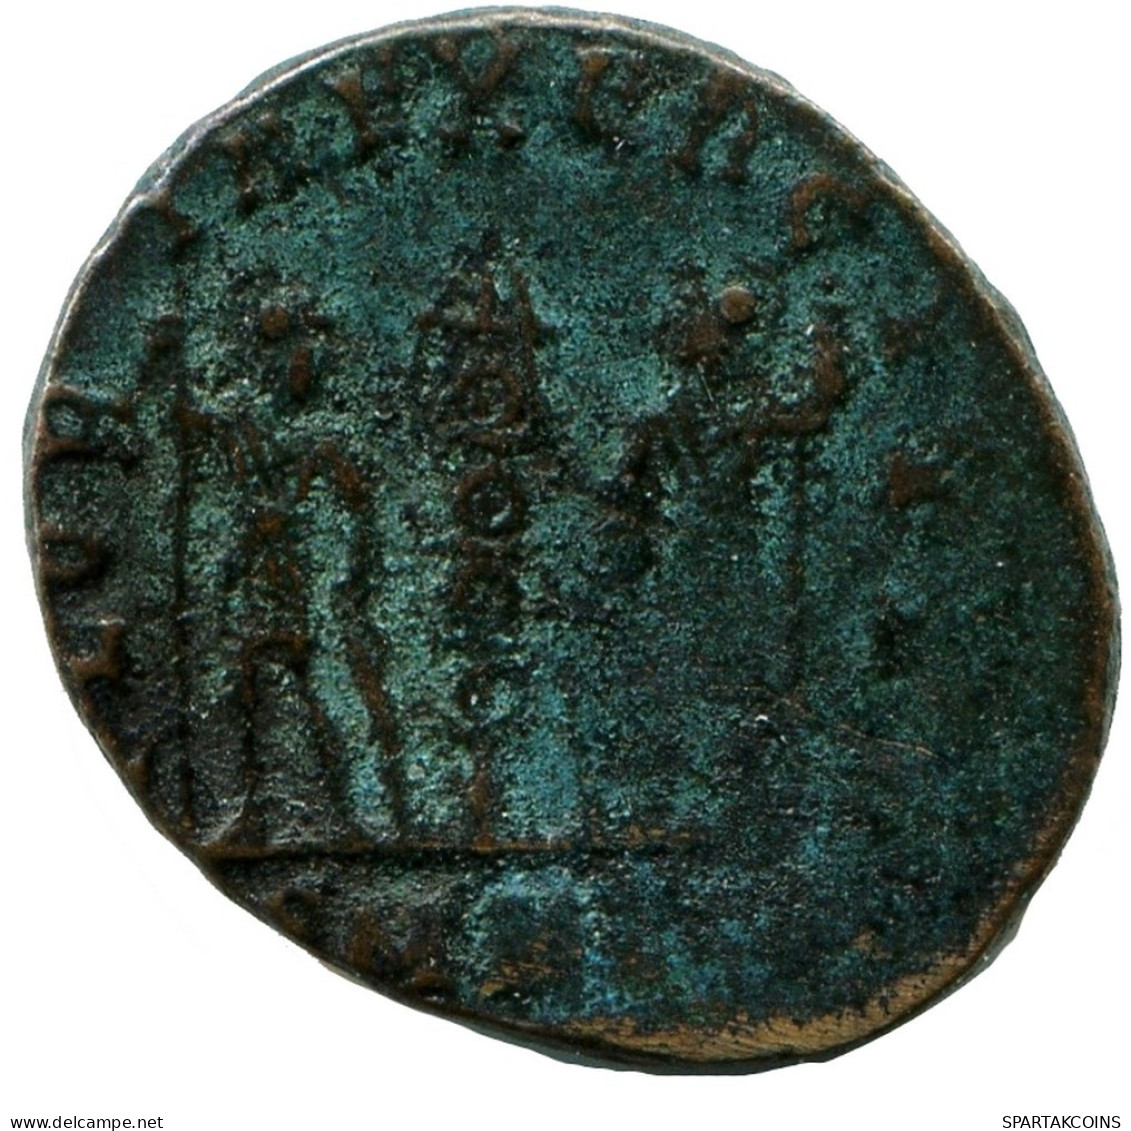 CONSTANS MINTED IN CYZICUS FROM THE ROYAL ONTARIO MUSEUM #ANC11605.14.F.A - L'Empire Chrétien (307 à 363)